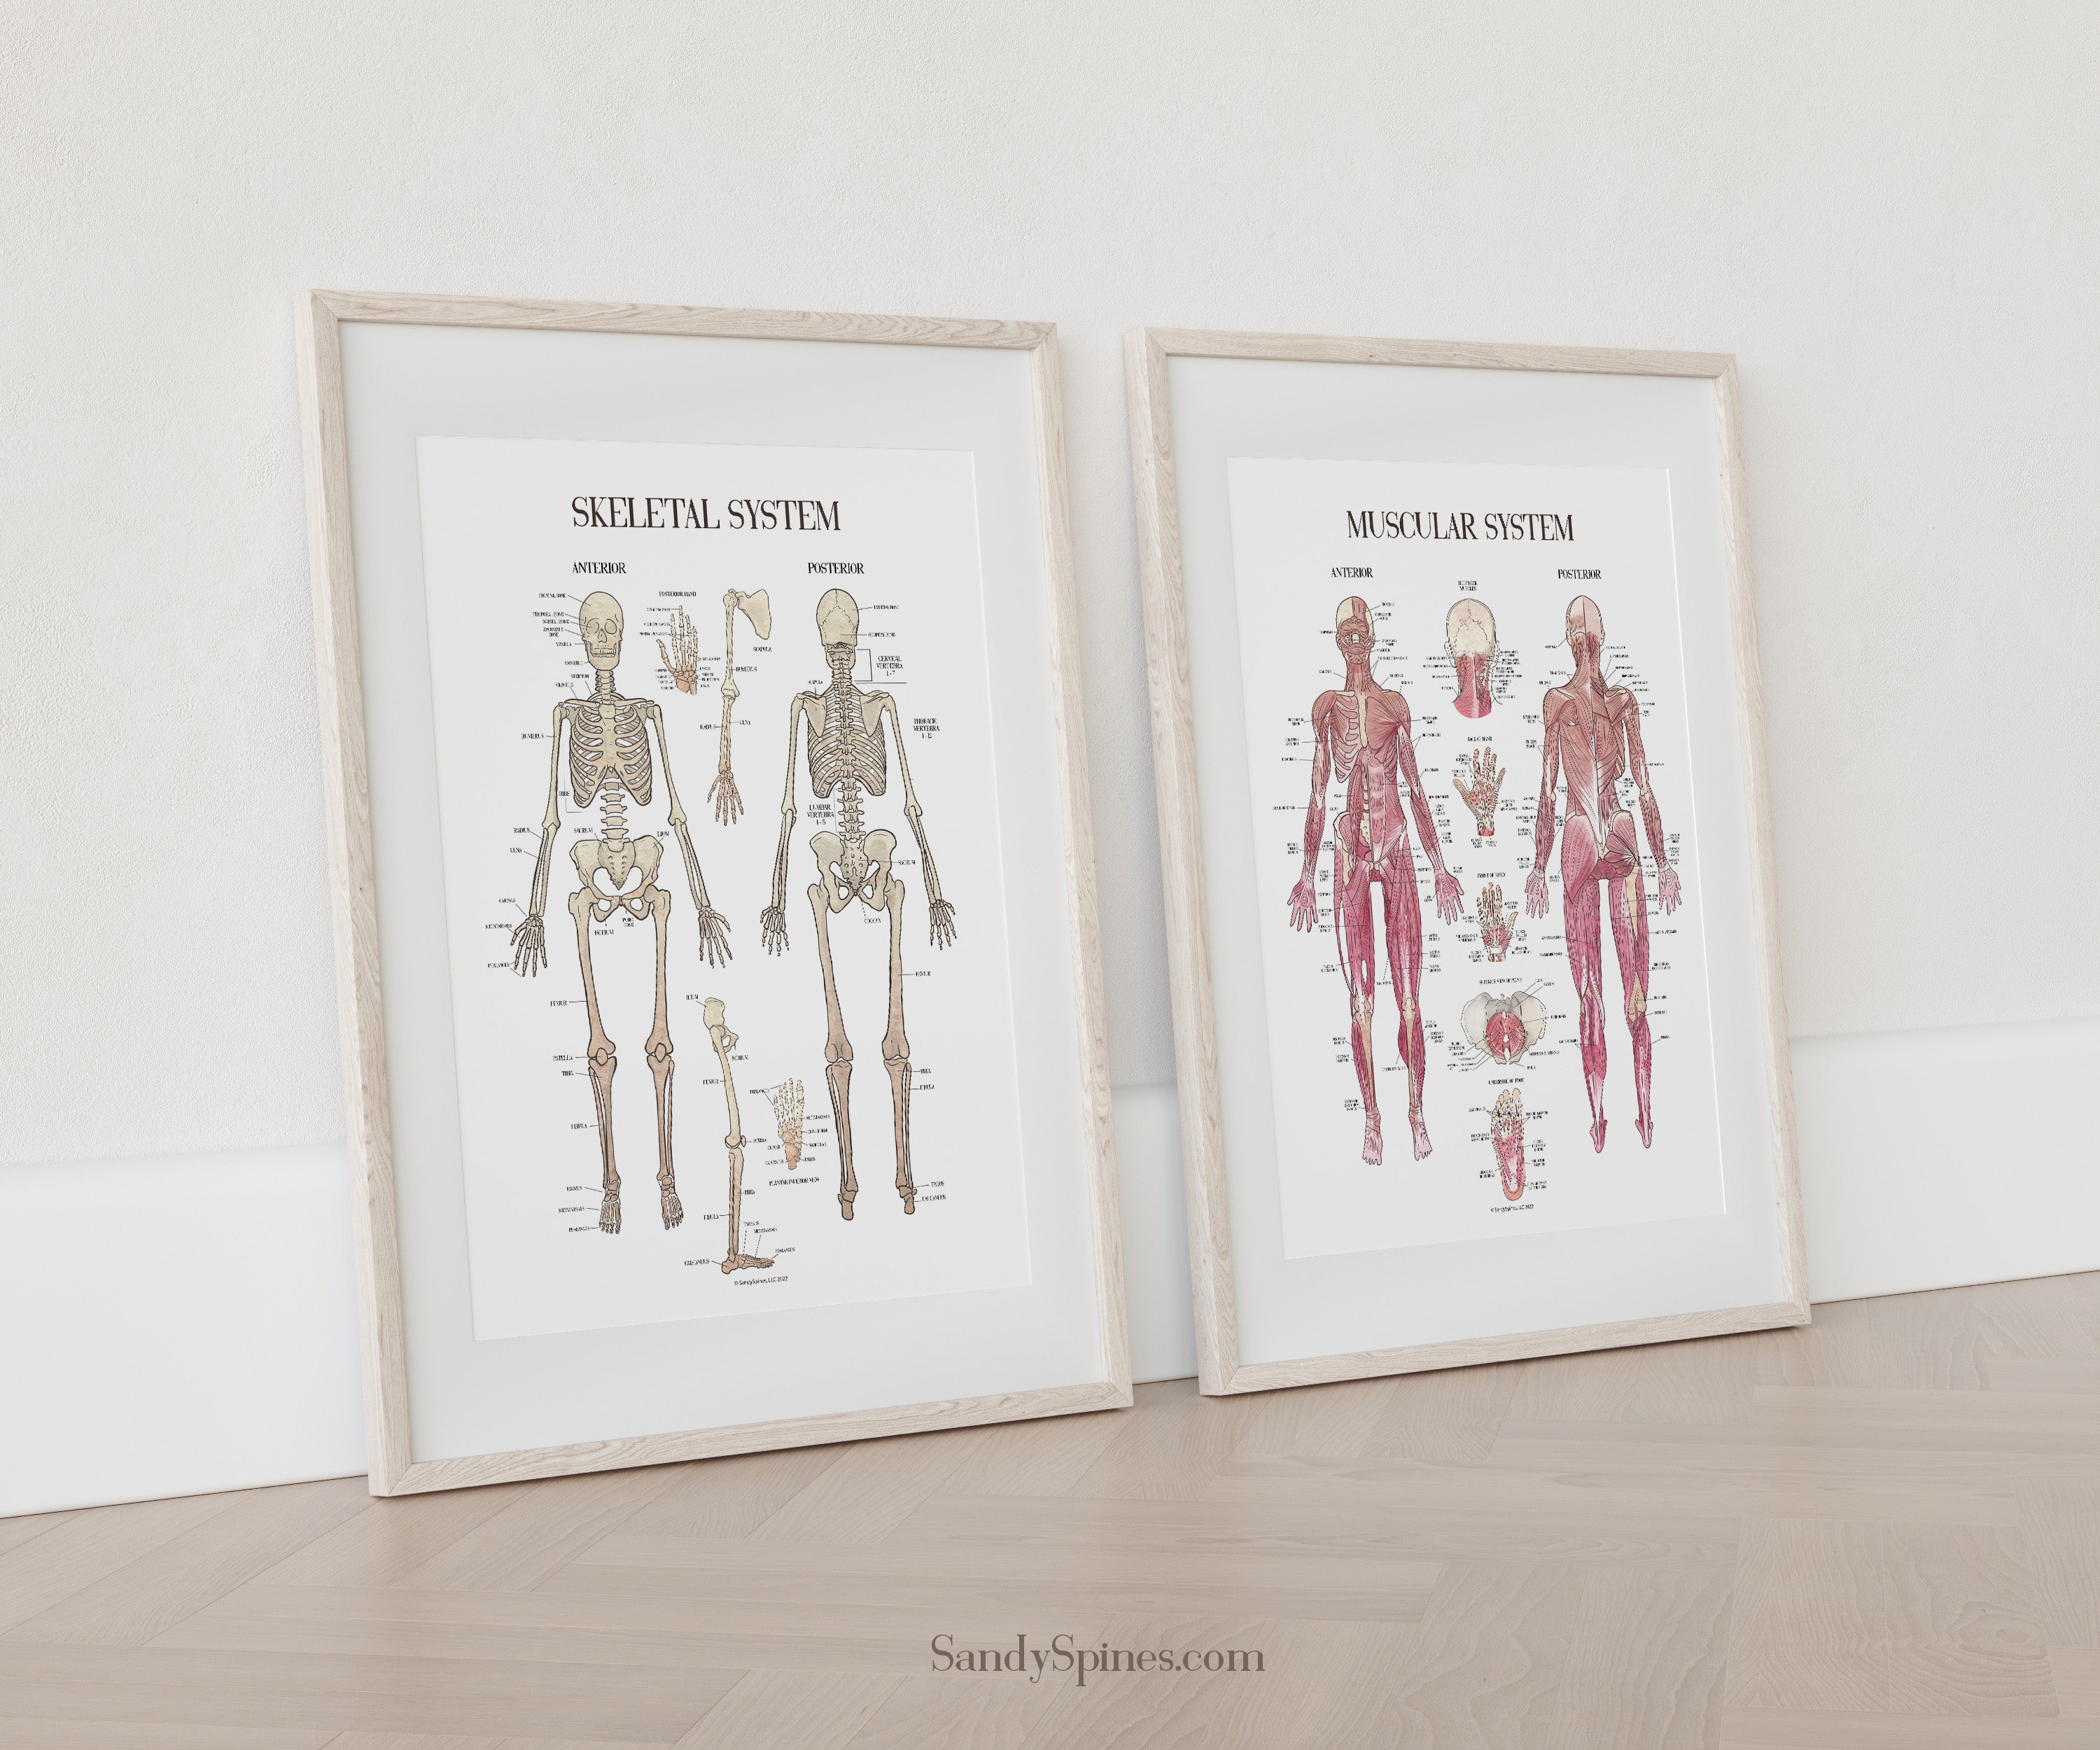 The Skeletal and Muscular System art pieces to hang in your doctors office.